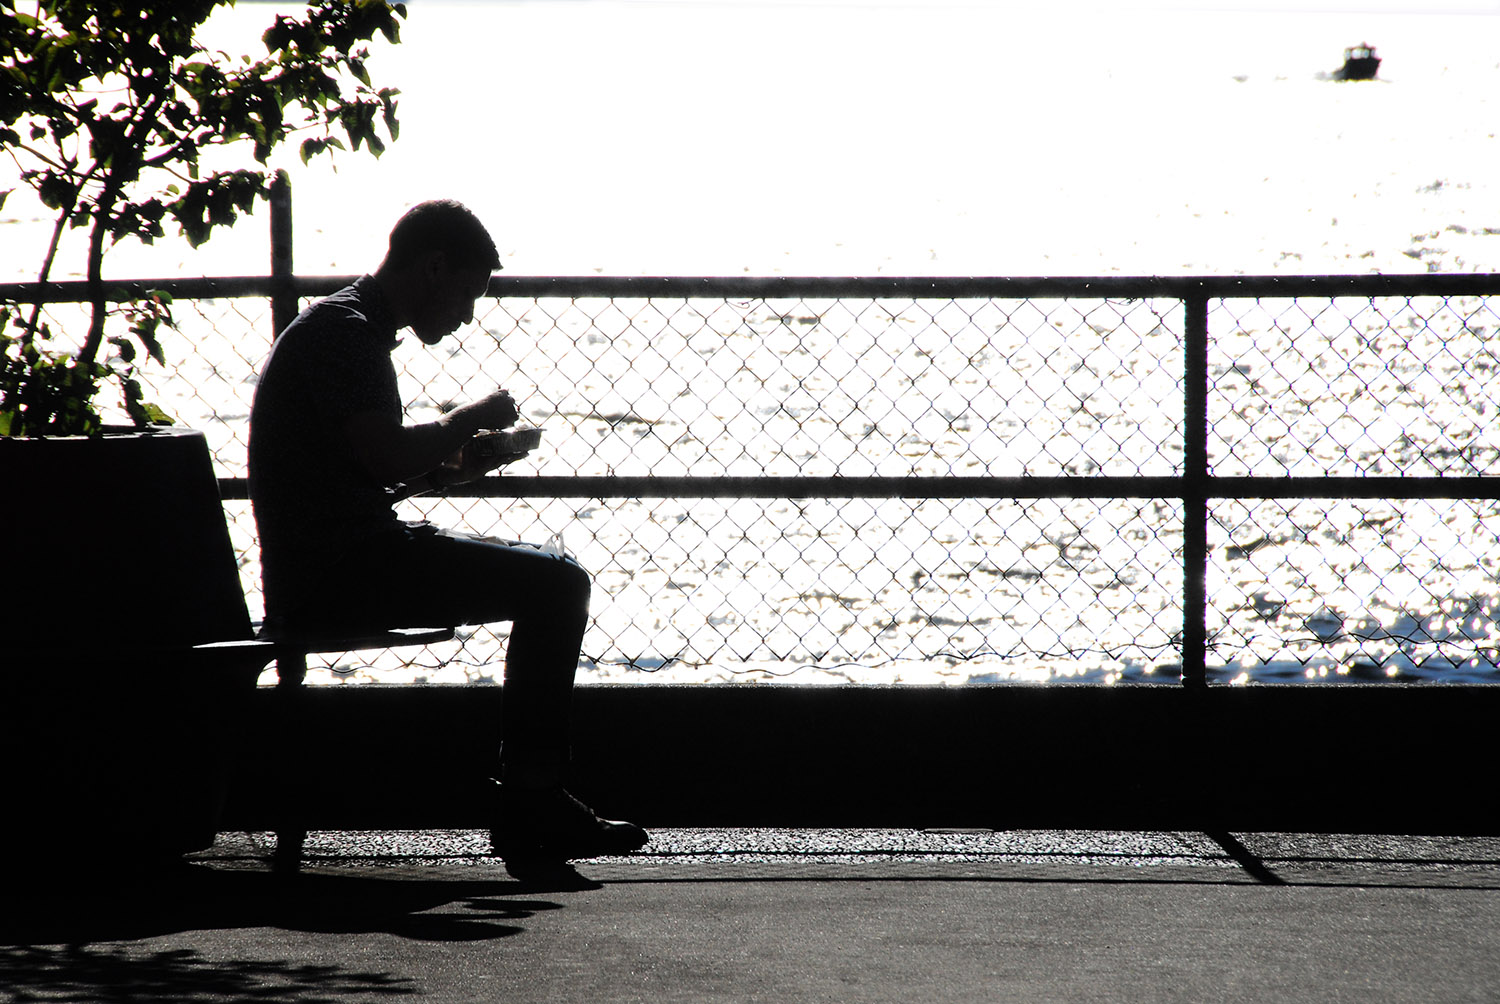 Man_Eating_Lunch_Lunchtime_Outdoors_Bench_Puget_Sound_Silhouette_Seattle_Washington.jpg